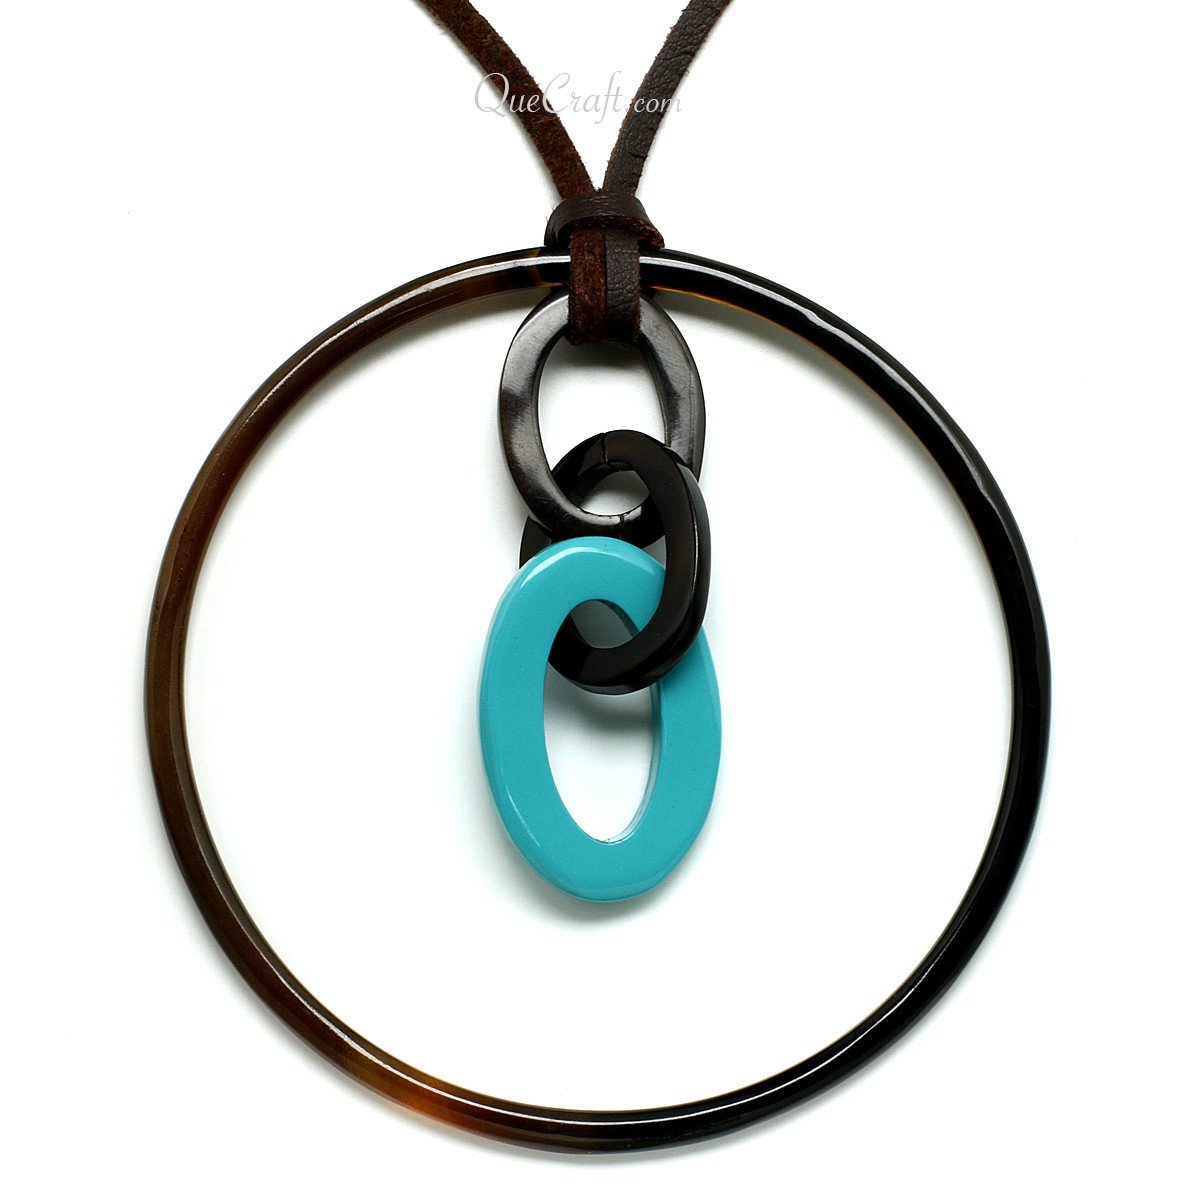 Horn & Lacquer Pendant #11451 - HORN JEWELRY